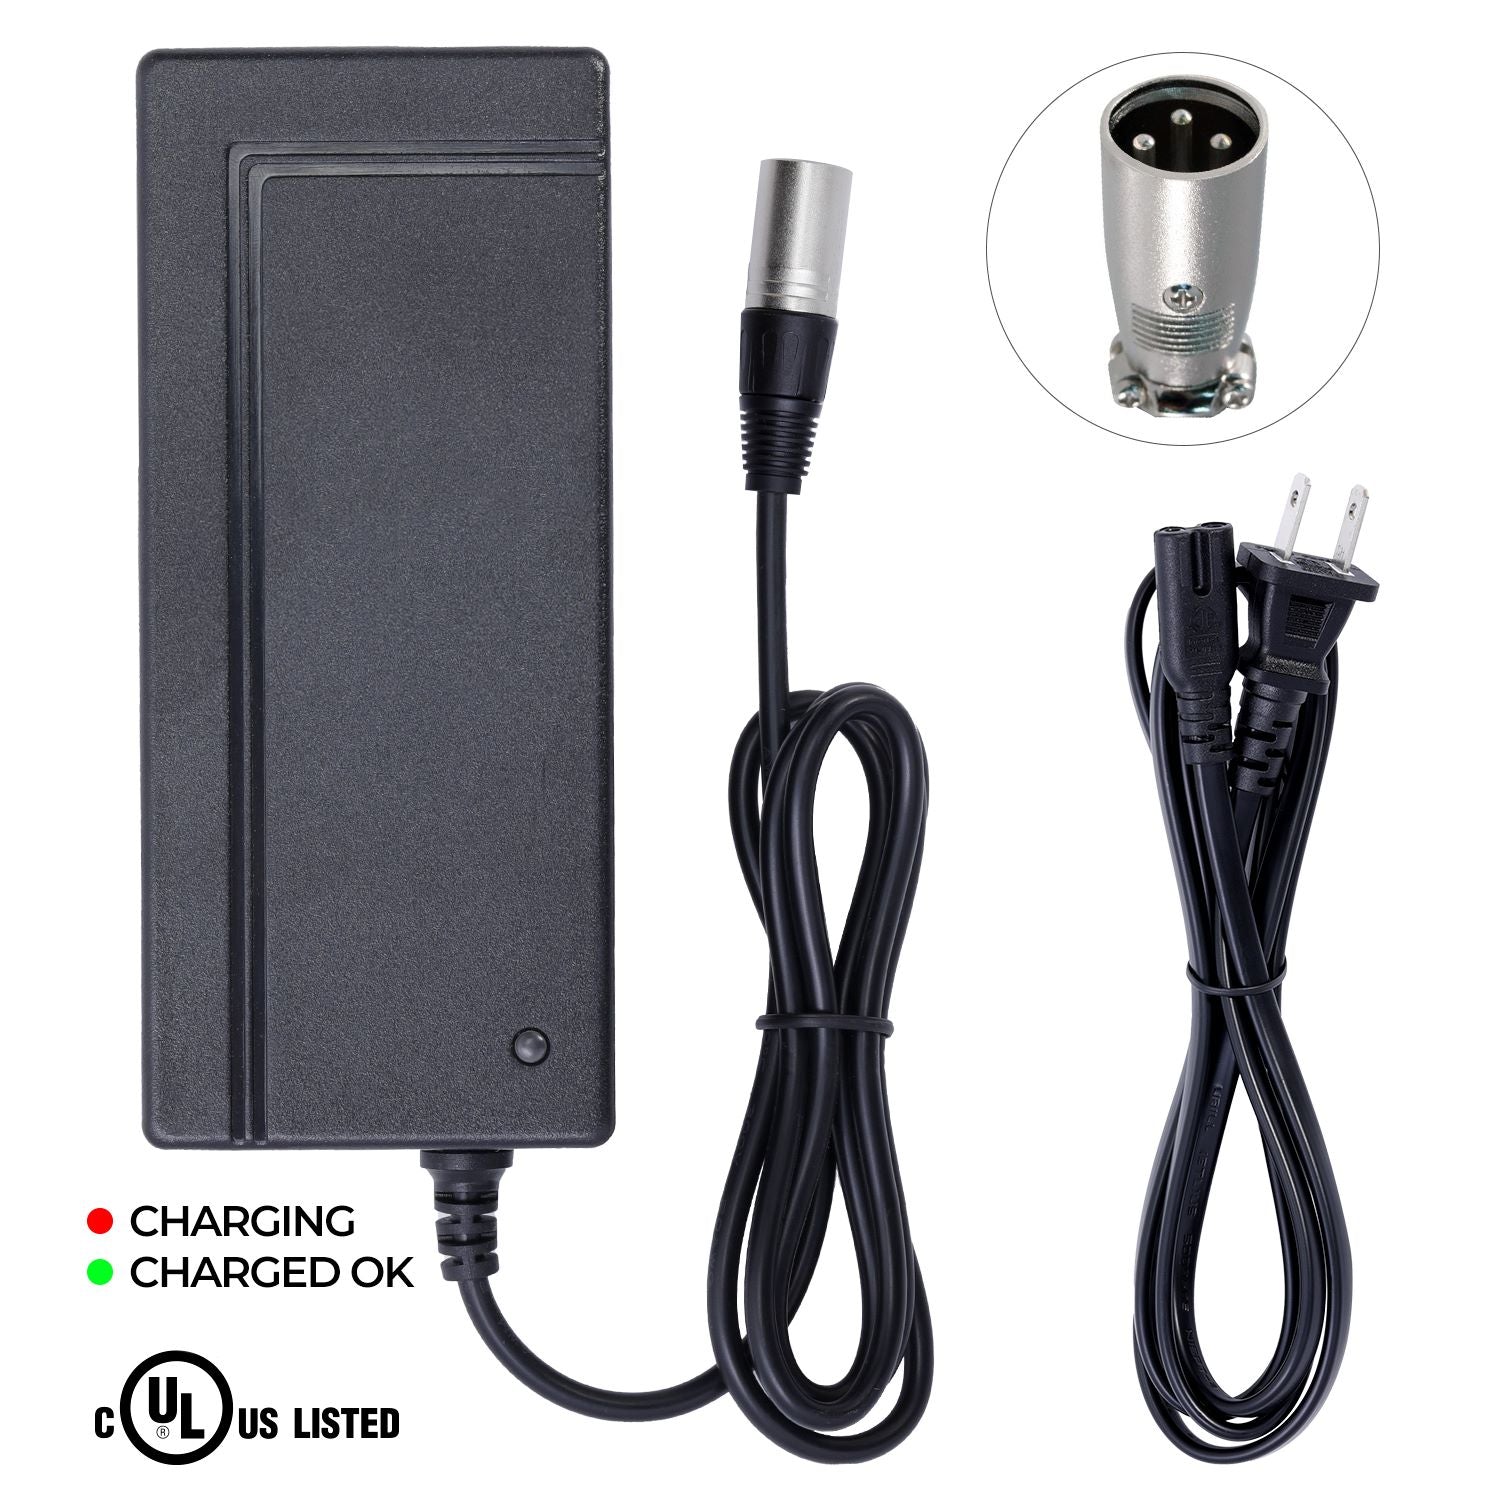 Charger for Pacelite HCF 735 Electric Scooter e-Bike